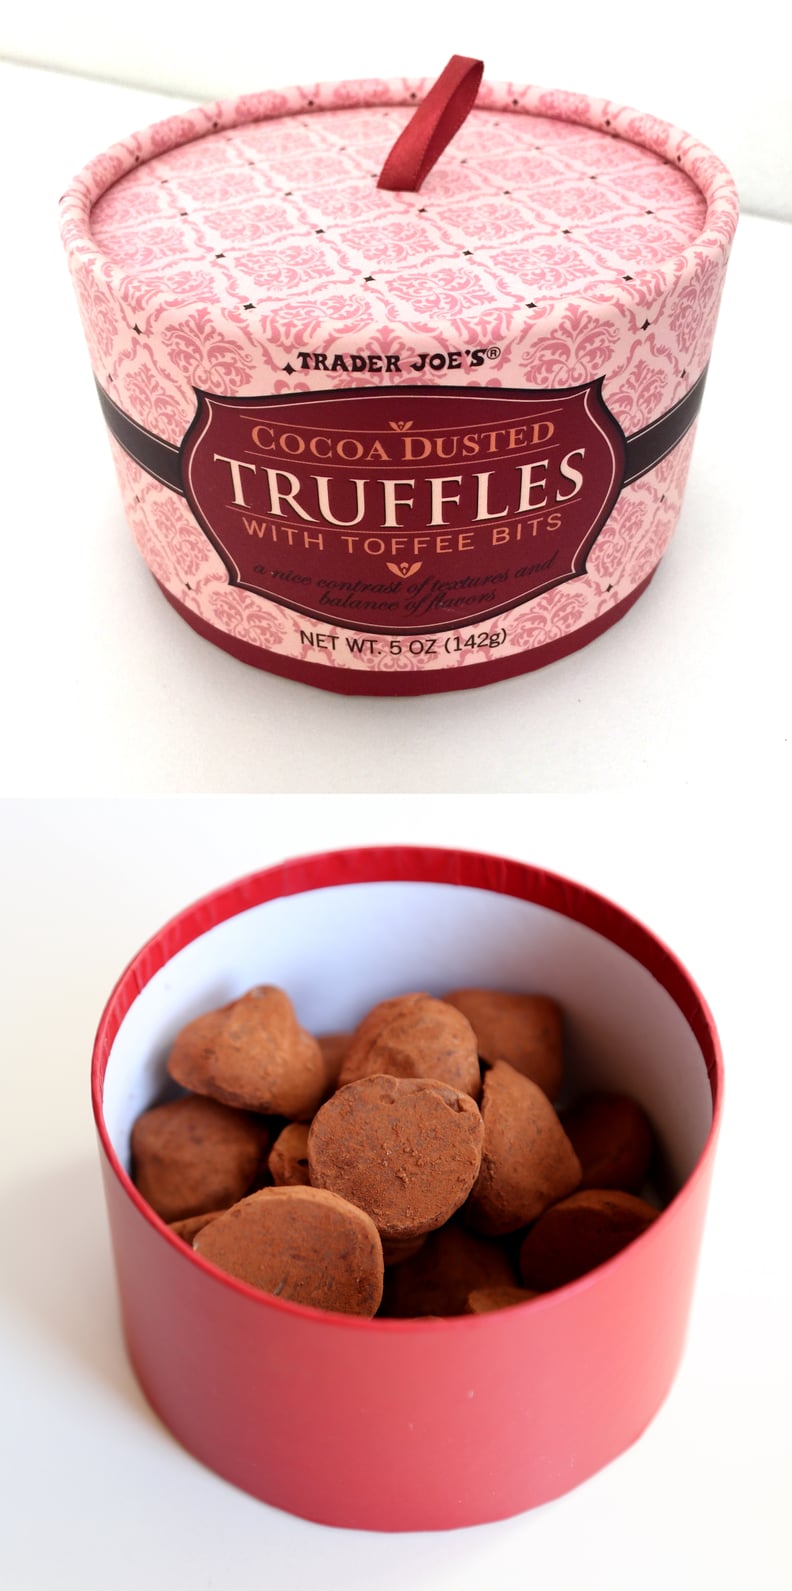 Pick Up: Cocoa Dusted Truffles With Toffee Bits ($4)